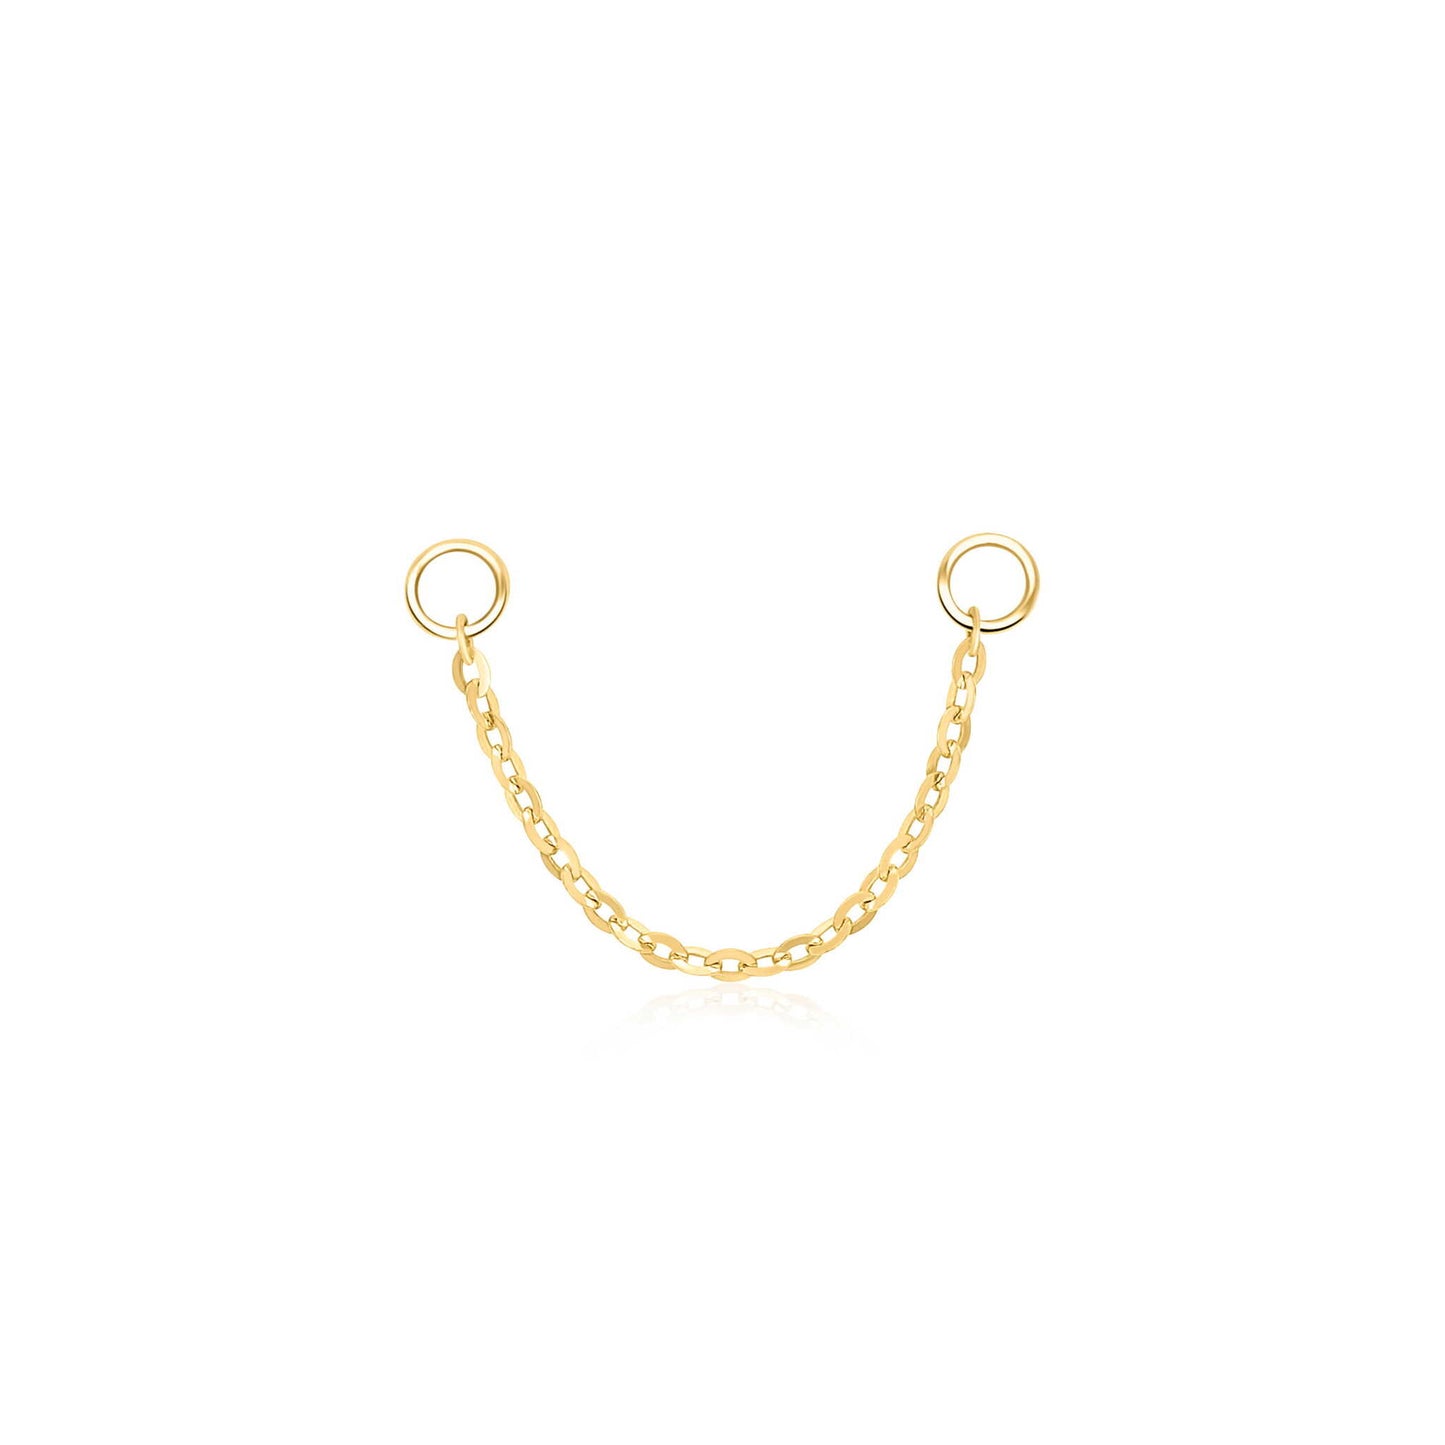 Frontal photo of the Earring Chains Gold